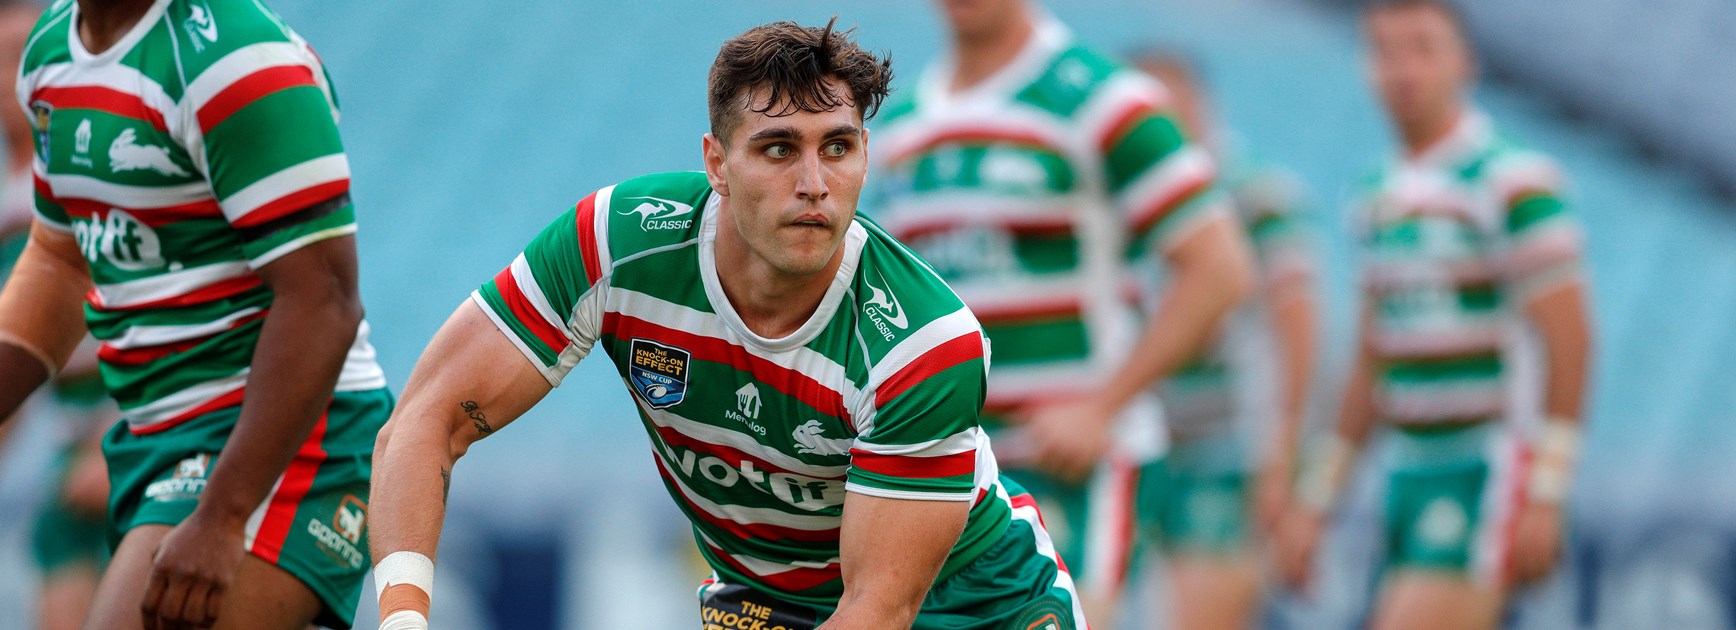 Nswrl Tv Preview Ladder Push By Rabbitohs And Sea Eagles Silktails On Show Nswrl